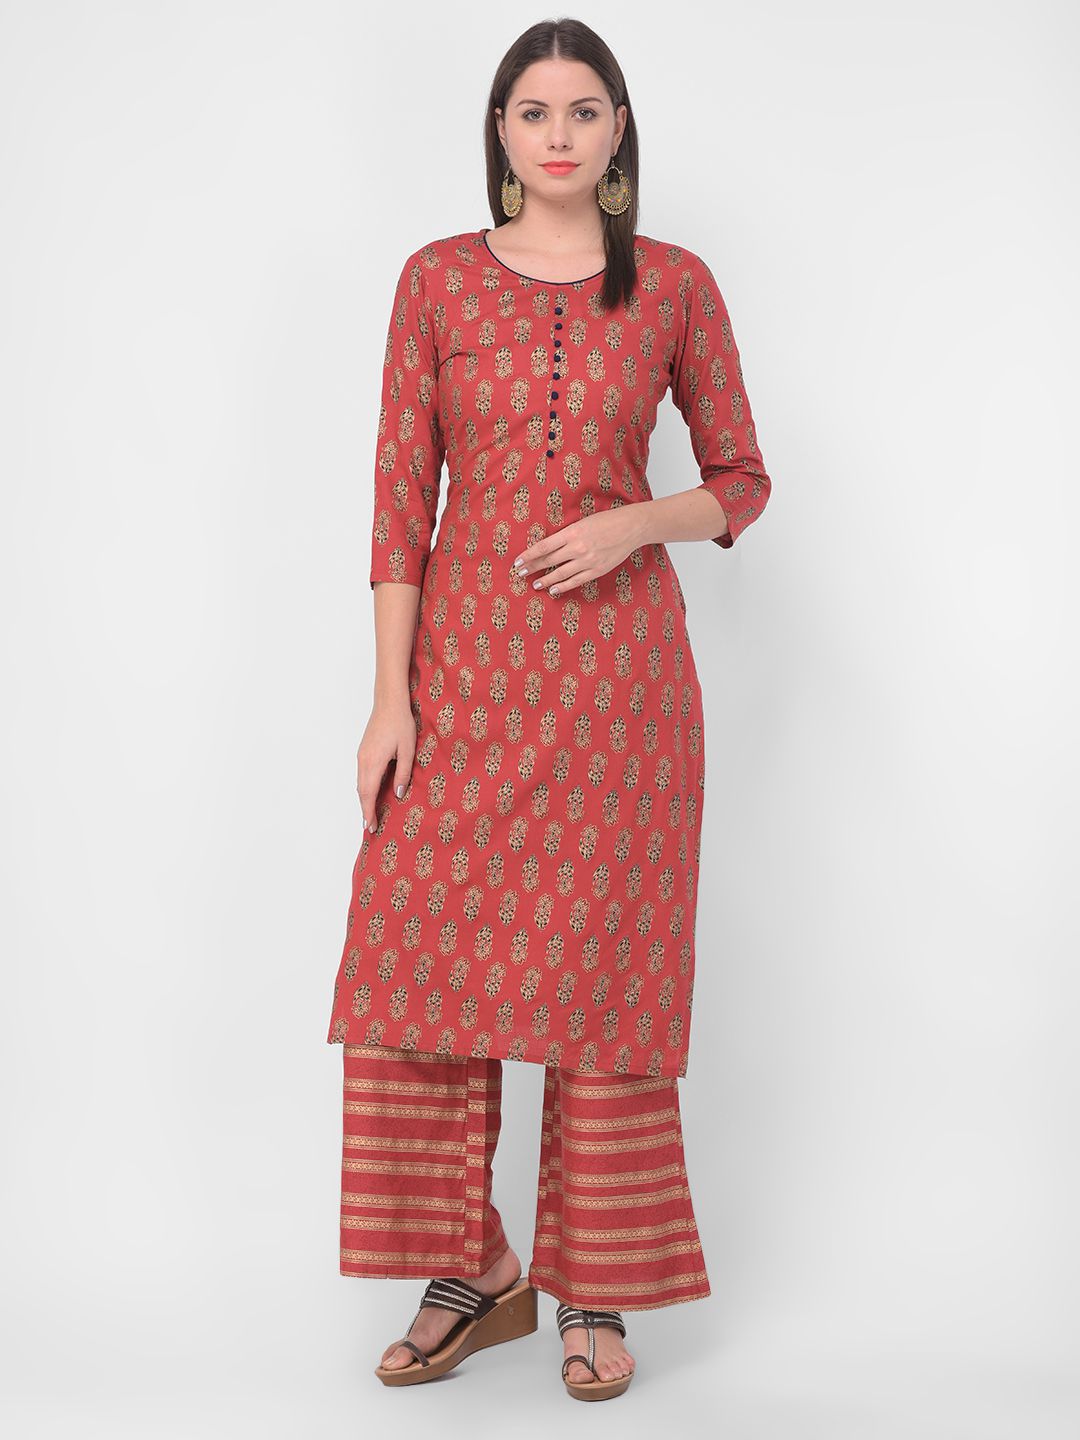     			aayusika Rayon Printed Kurti With Pants Women's Stitched Salwar Suit - Maroon ( Pack of 1 )